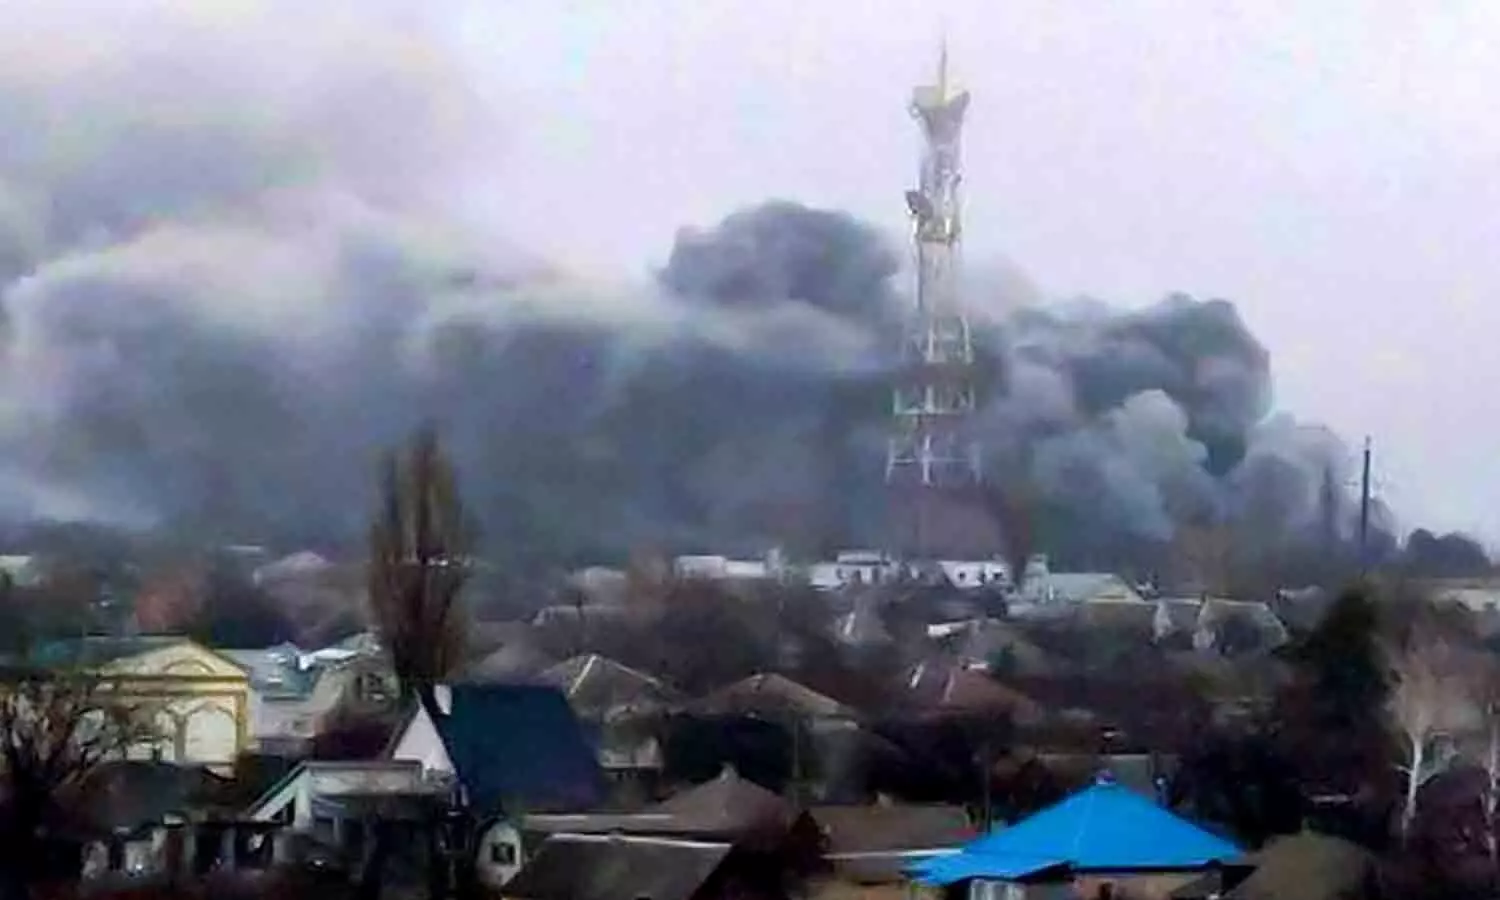 Russia Ukraine War: War continues between Russia and Ukraine, 9 people killed in attack on TV tower